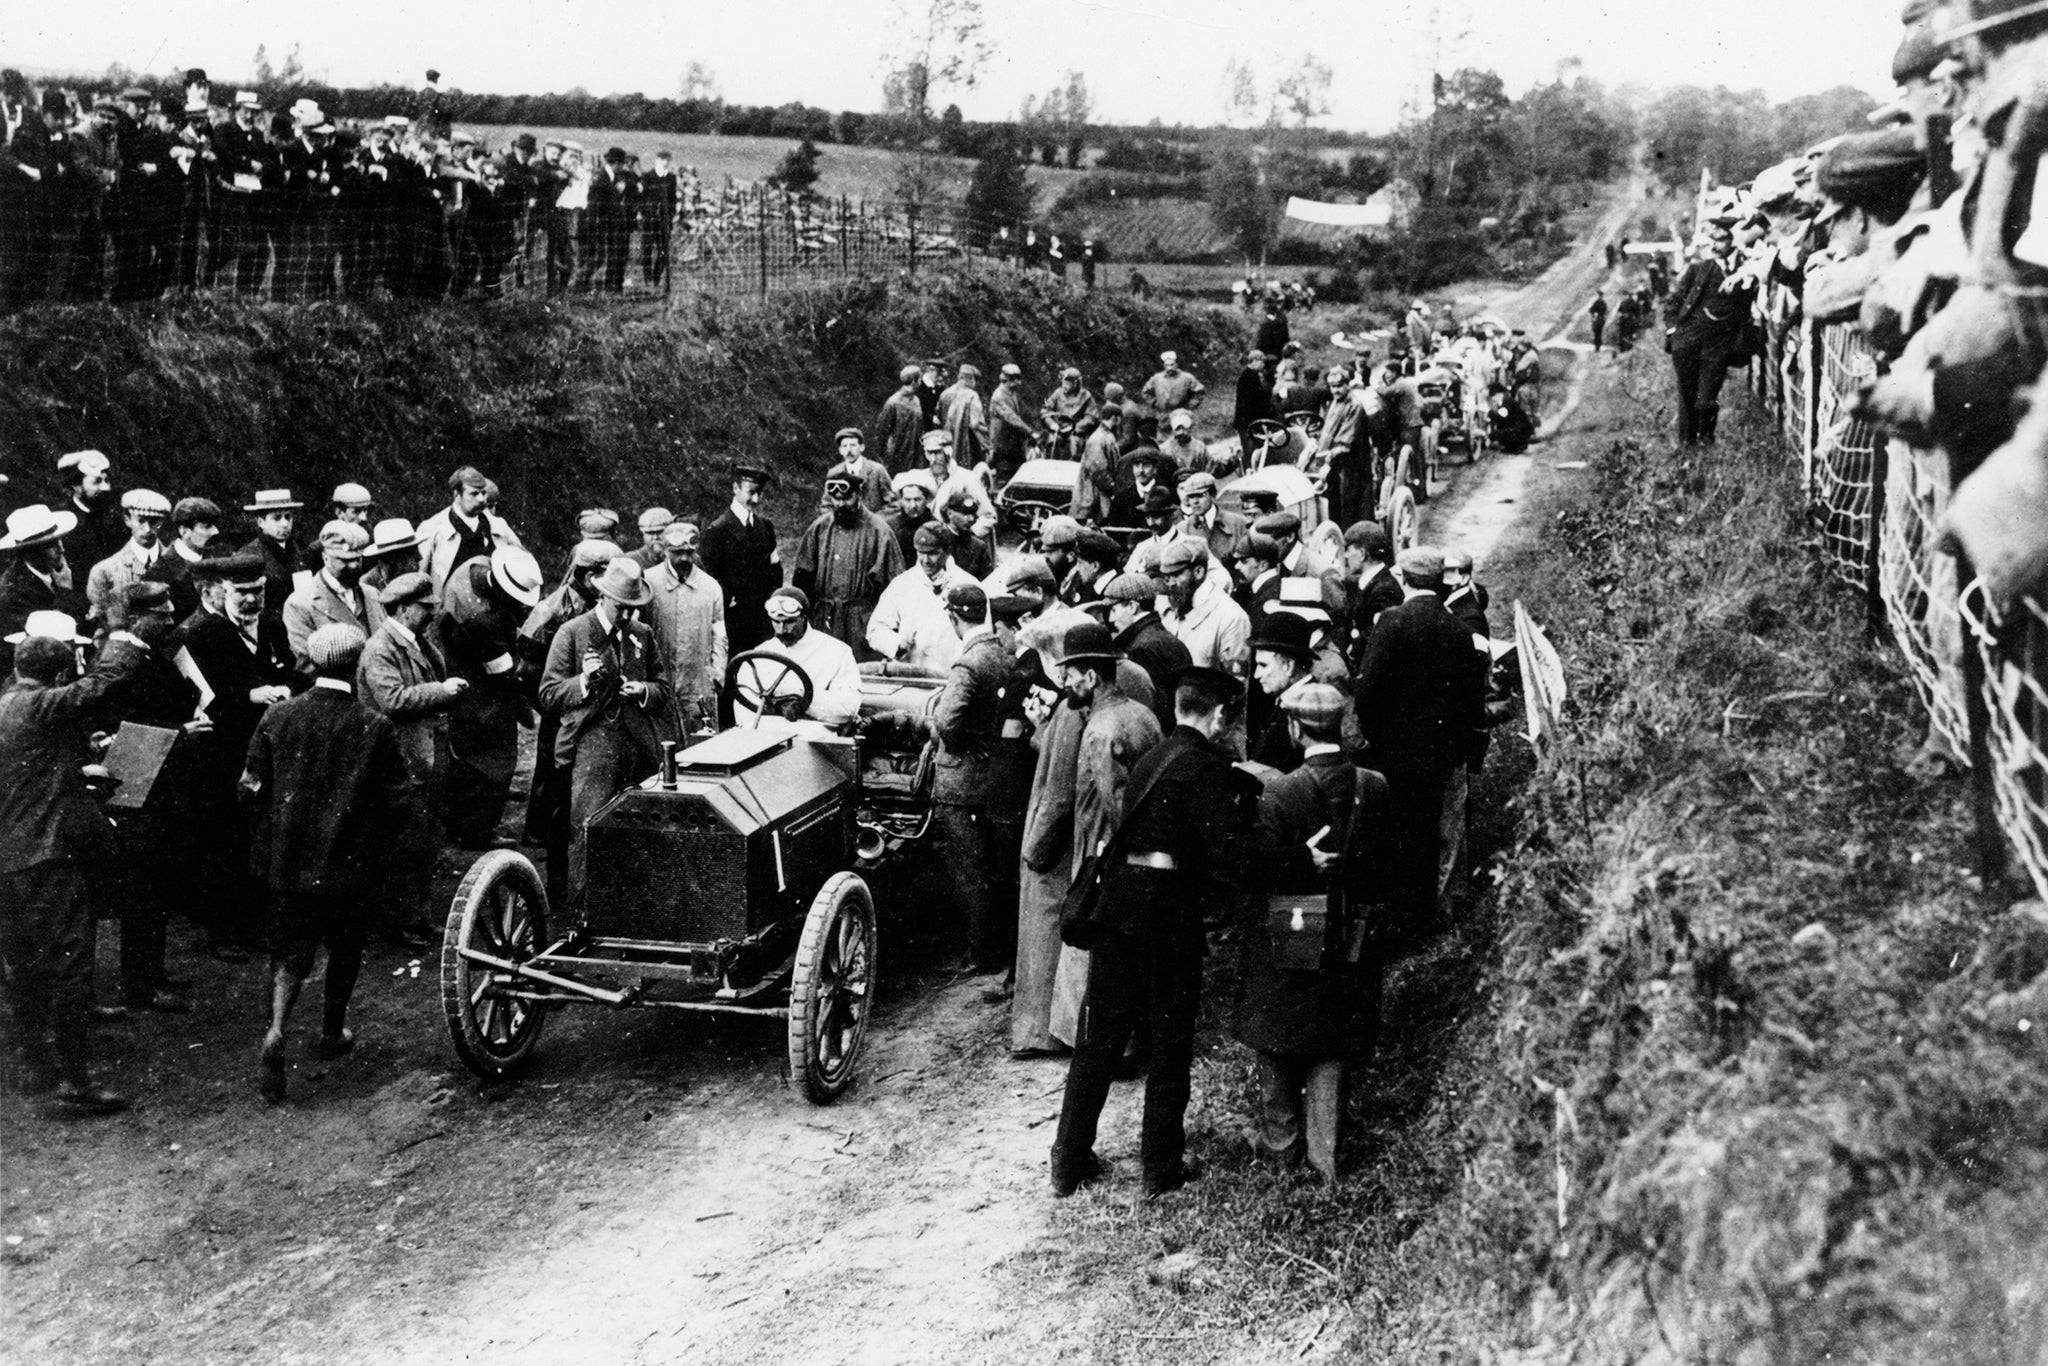 Selwyn Francis Edge in a Napier, 1903 Gordon Bennett race. The Gordon Bennett Races were organised by James Gordon Bennett, proprietor of the New York Herald newspaper to help promote the motor industry. The first race was held between Paris and Lyon in 1900, but in 1903 the race was staged on a circuit for the first time, at Athy in Ireland. The Gordon Bennett Races are regarded as the birth of the idea of Grand Prix motor racing. Selwyn Francis Edge was disqualified from the 1903 race for receiving a push start, having won the previous year's event. (Photo by National Motor Museum/Heritage Images/Getty Images)